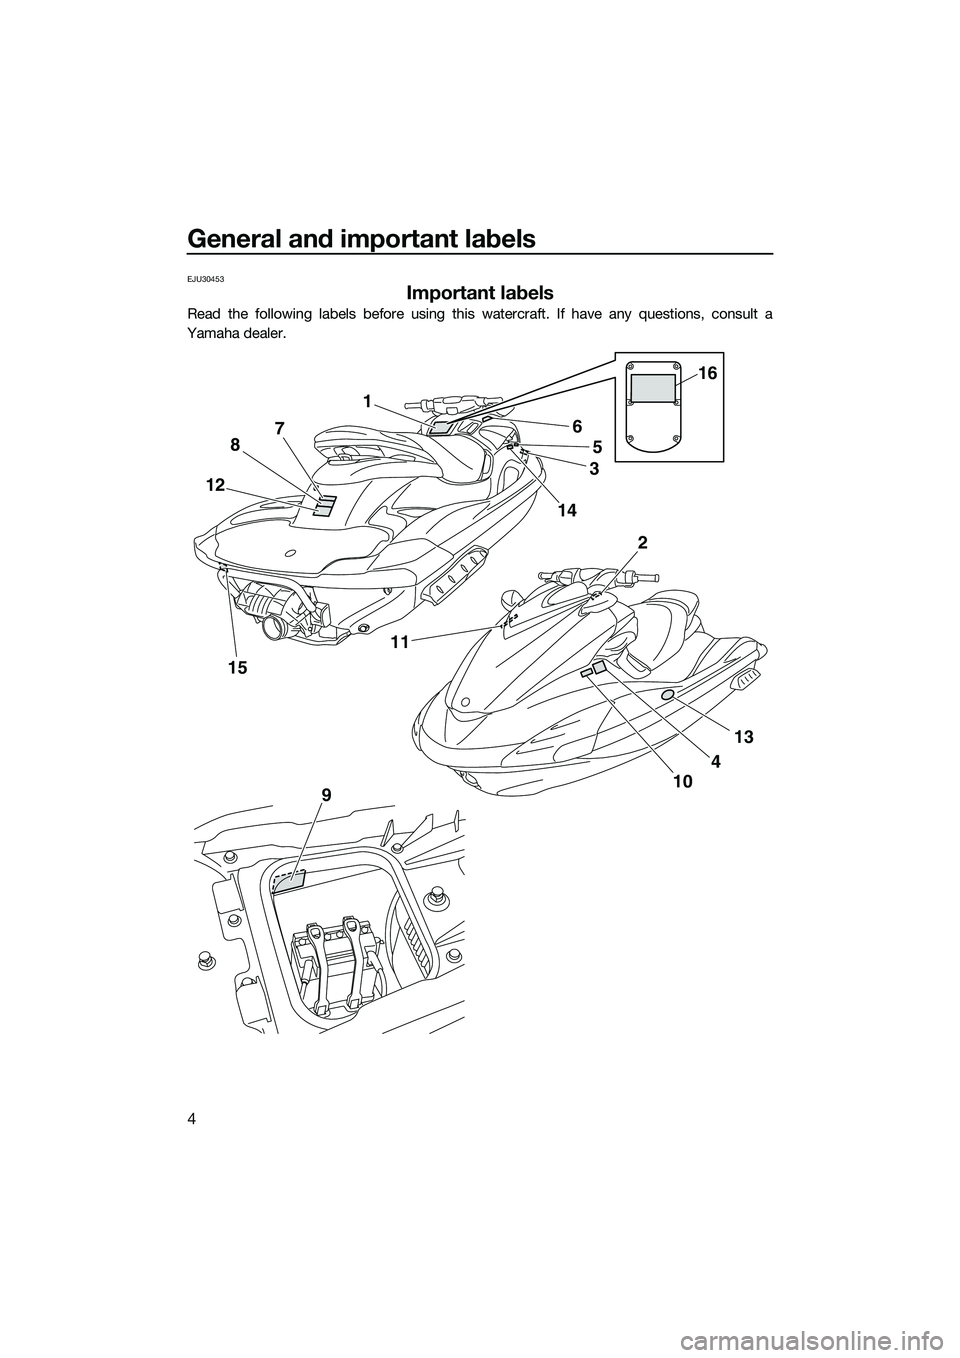 YAMAHA FZS SVHO 2014  Owners Manual General and important labels
4
EJU30453
Important labels
Read the following labels before using this watercraft. If have any questions, consult a
Yamaha dealer.
1
5
3
14
4
10
6
8 7
12
15 11
13
2
9
16
